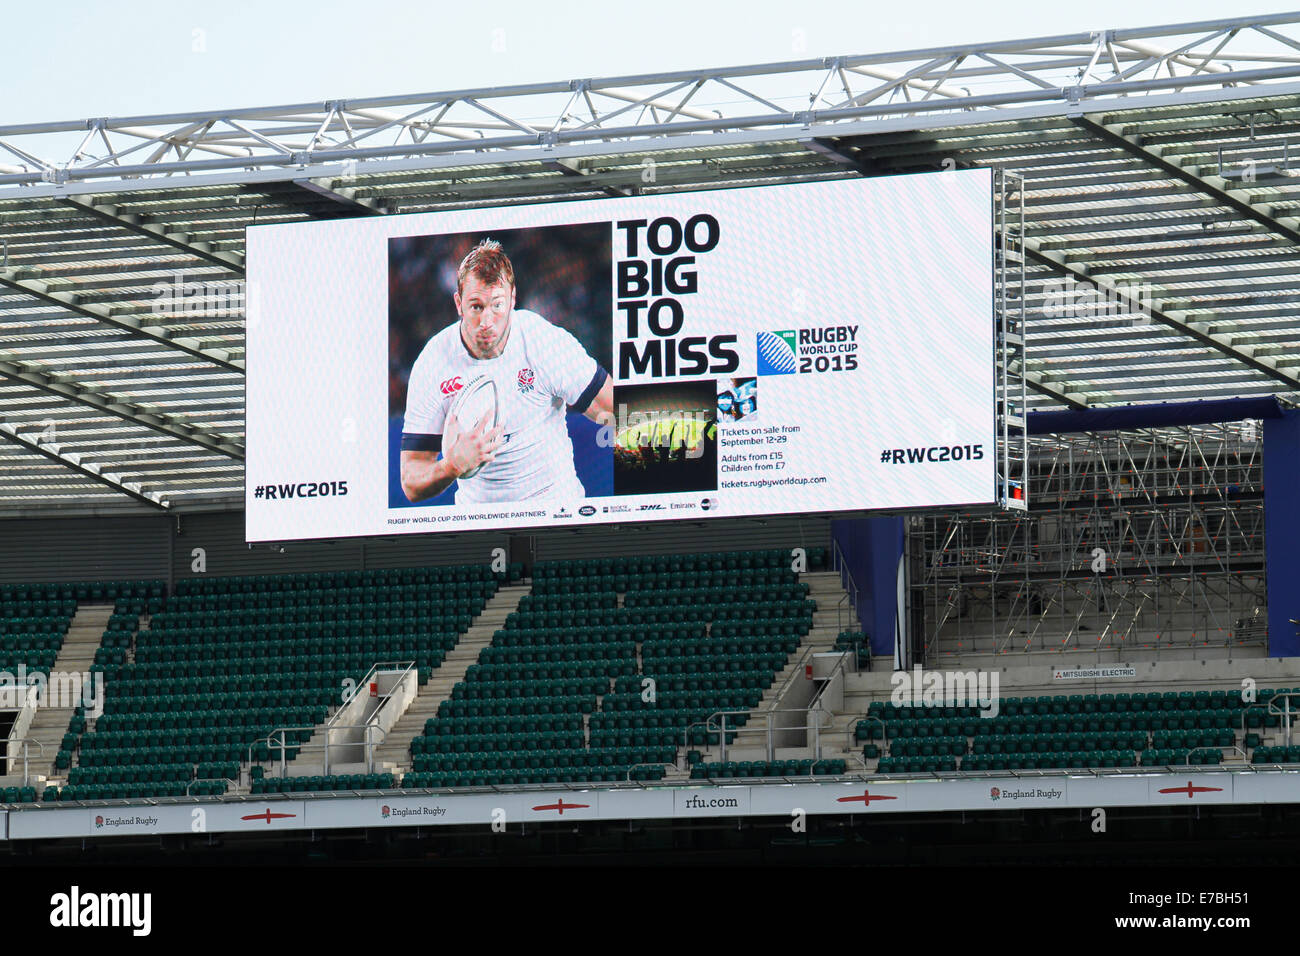 London, UK. 12th September 2014. Too Big To Miss rugby England 2015 billboard during the Rugby World Cup 2015 largest scrum record attempt at Twickenham. Credit: Elsie Kibue / Alamy Live News Stock Photo